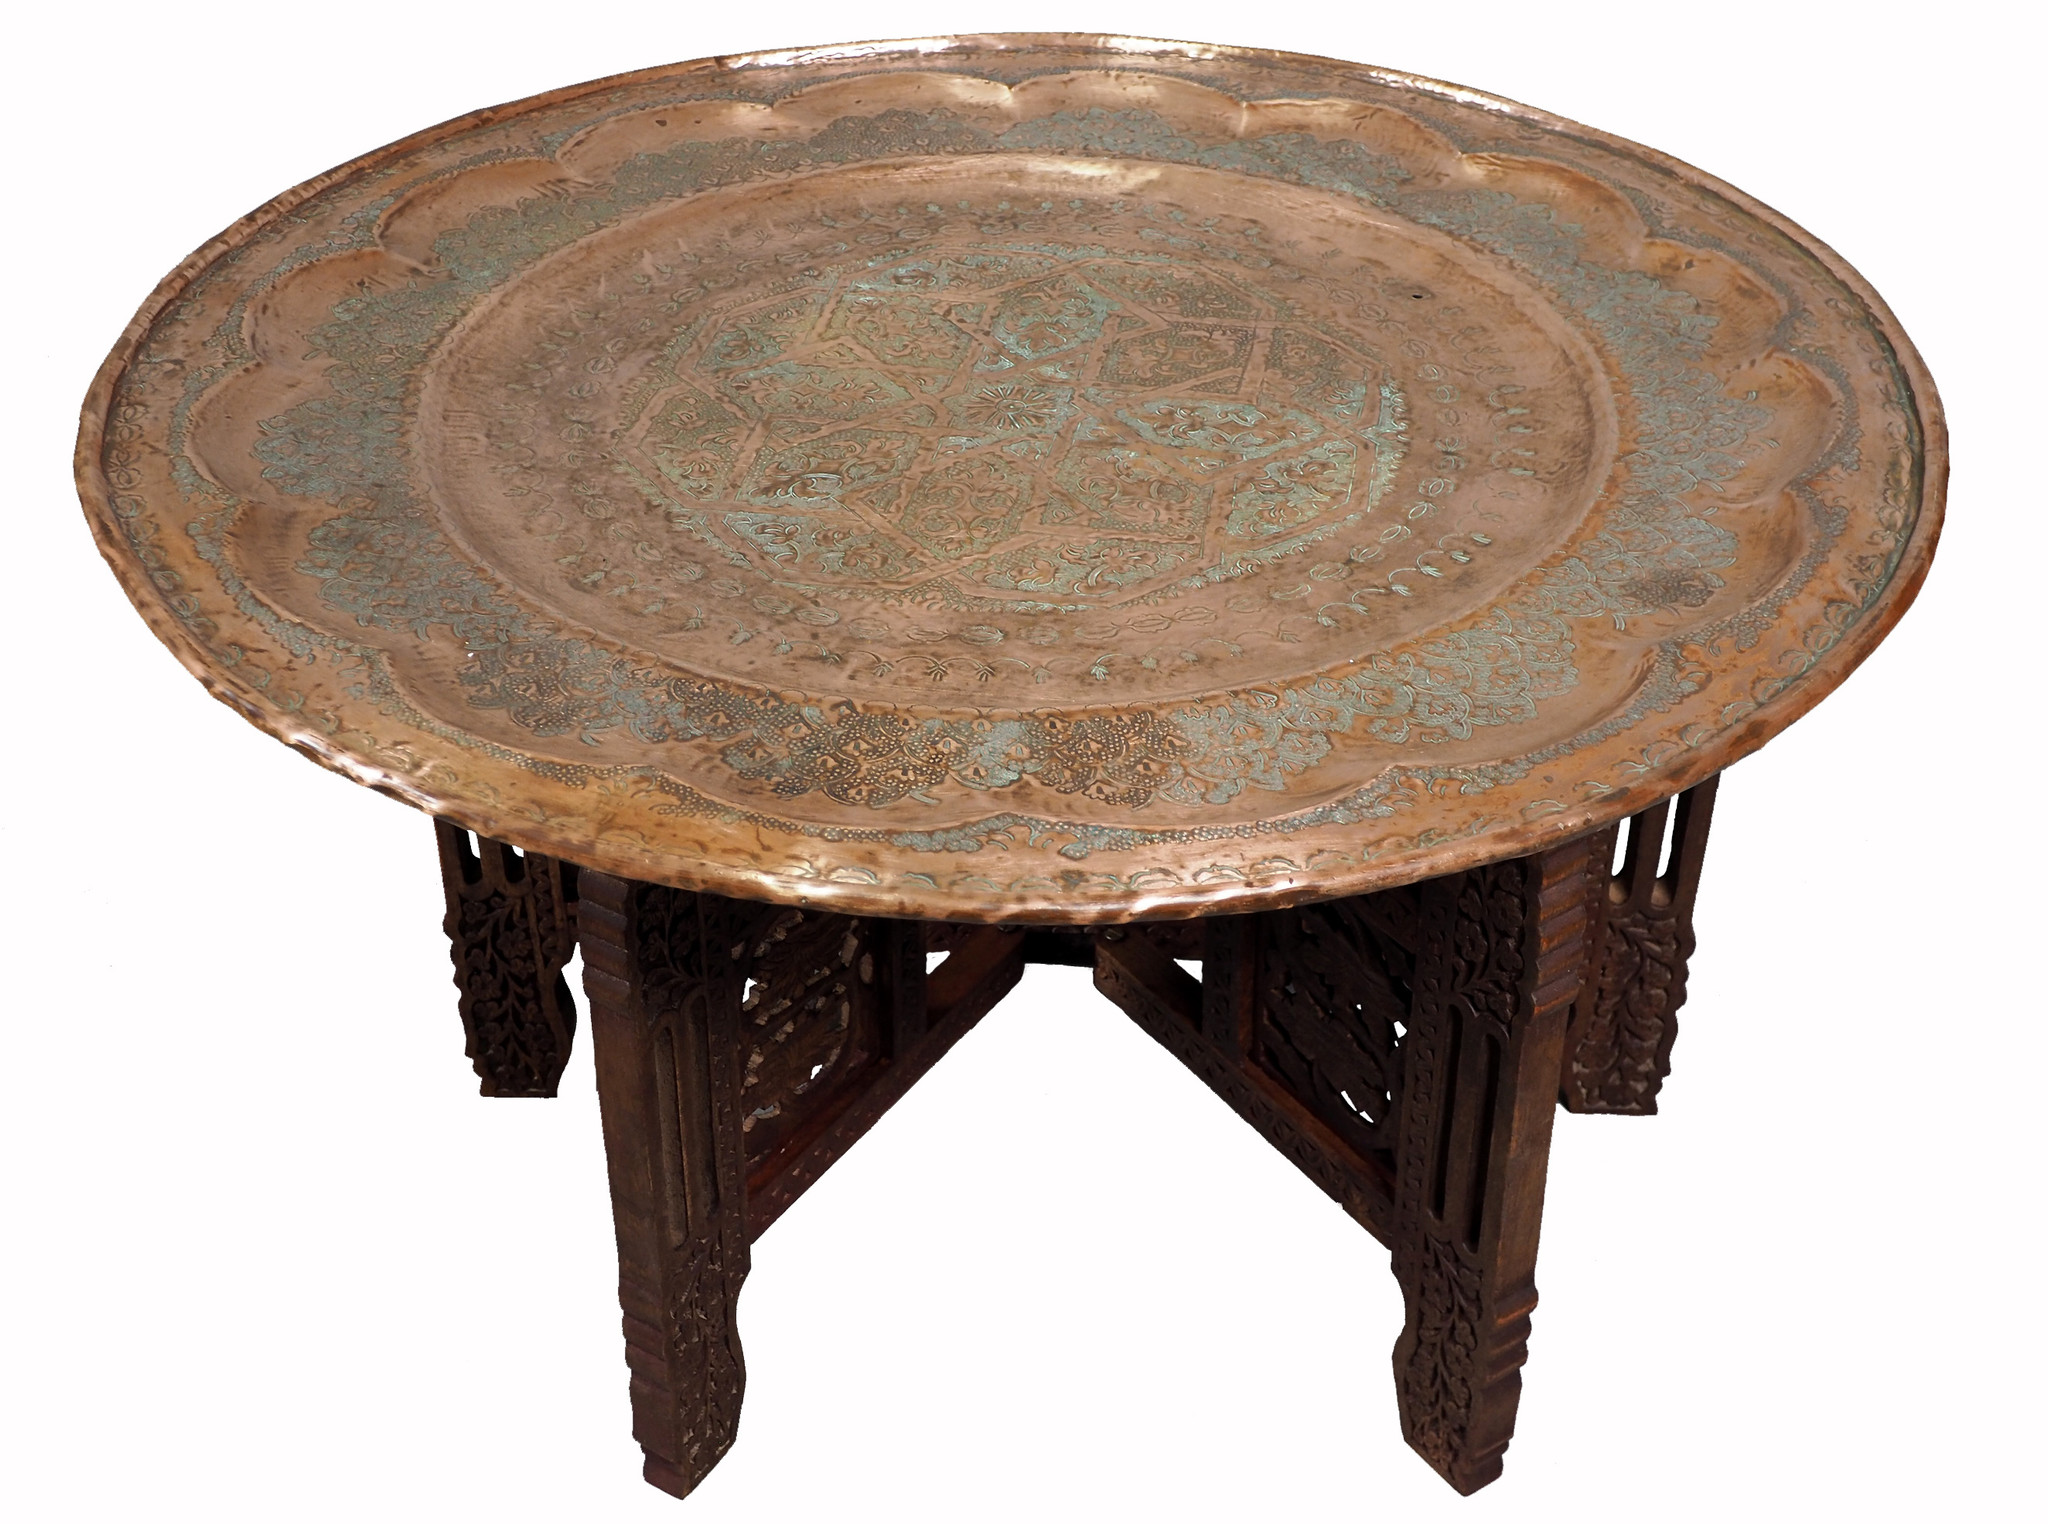 76  cm Ø  Antique ottoman orient Islamic  Hammer Engraved copper table Tea table side table Tray from Afghanistan  No-HH12